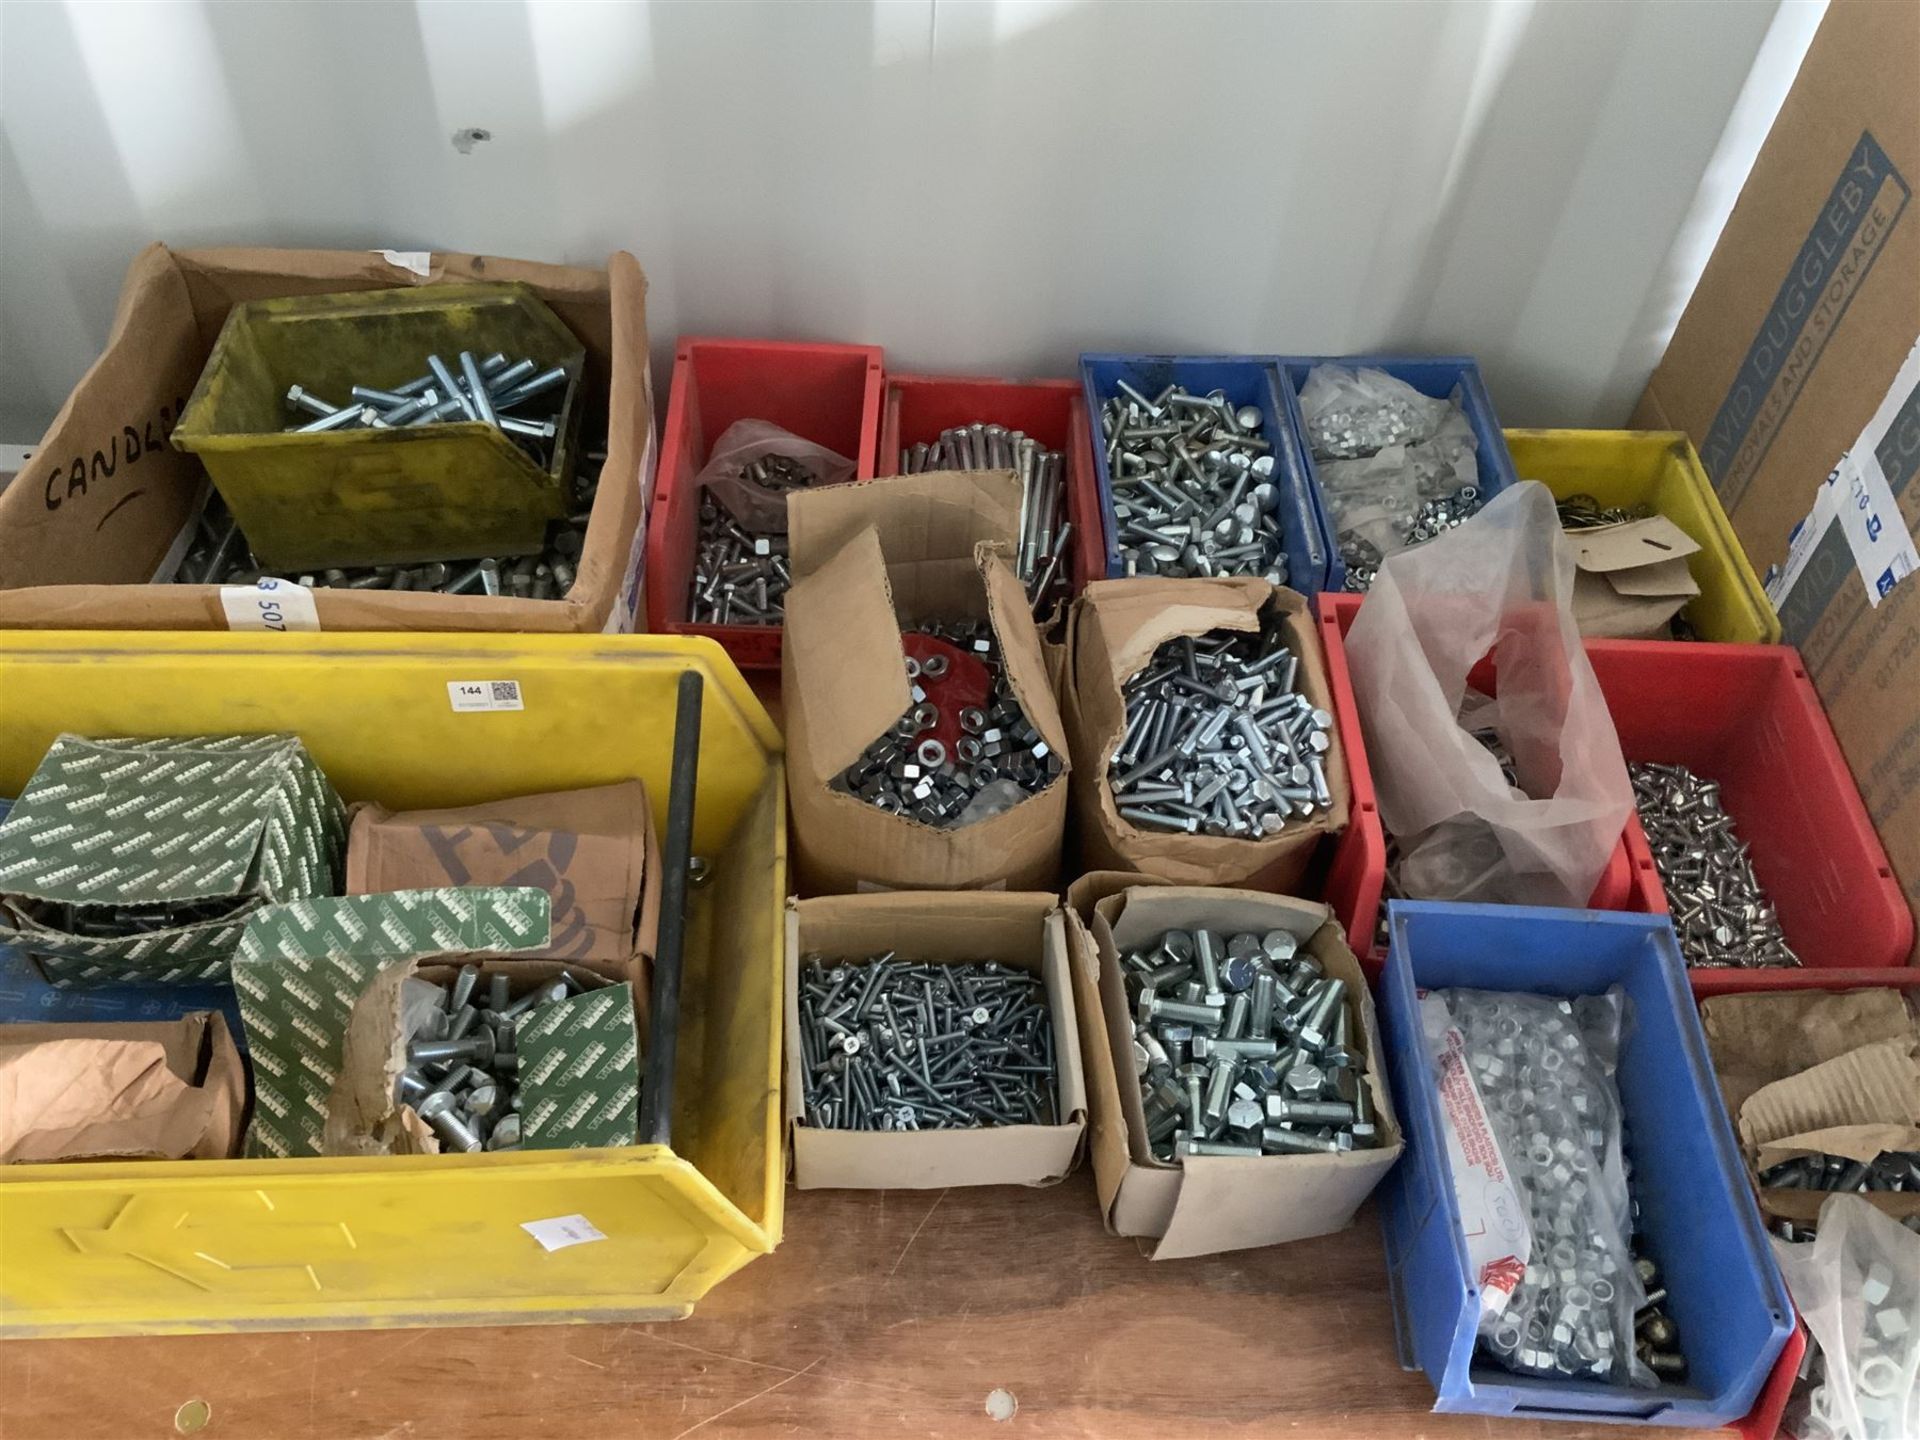 Quantity of unused nuts and bolts - THIS LOT IS TO BE COLLECTED BY APPOINTMENT FROM DUGGLEBY STORAGE